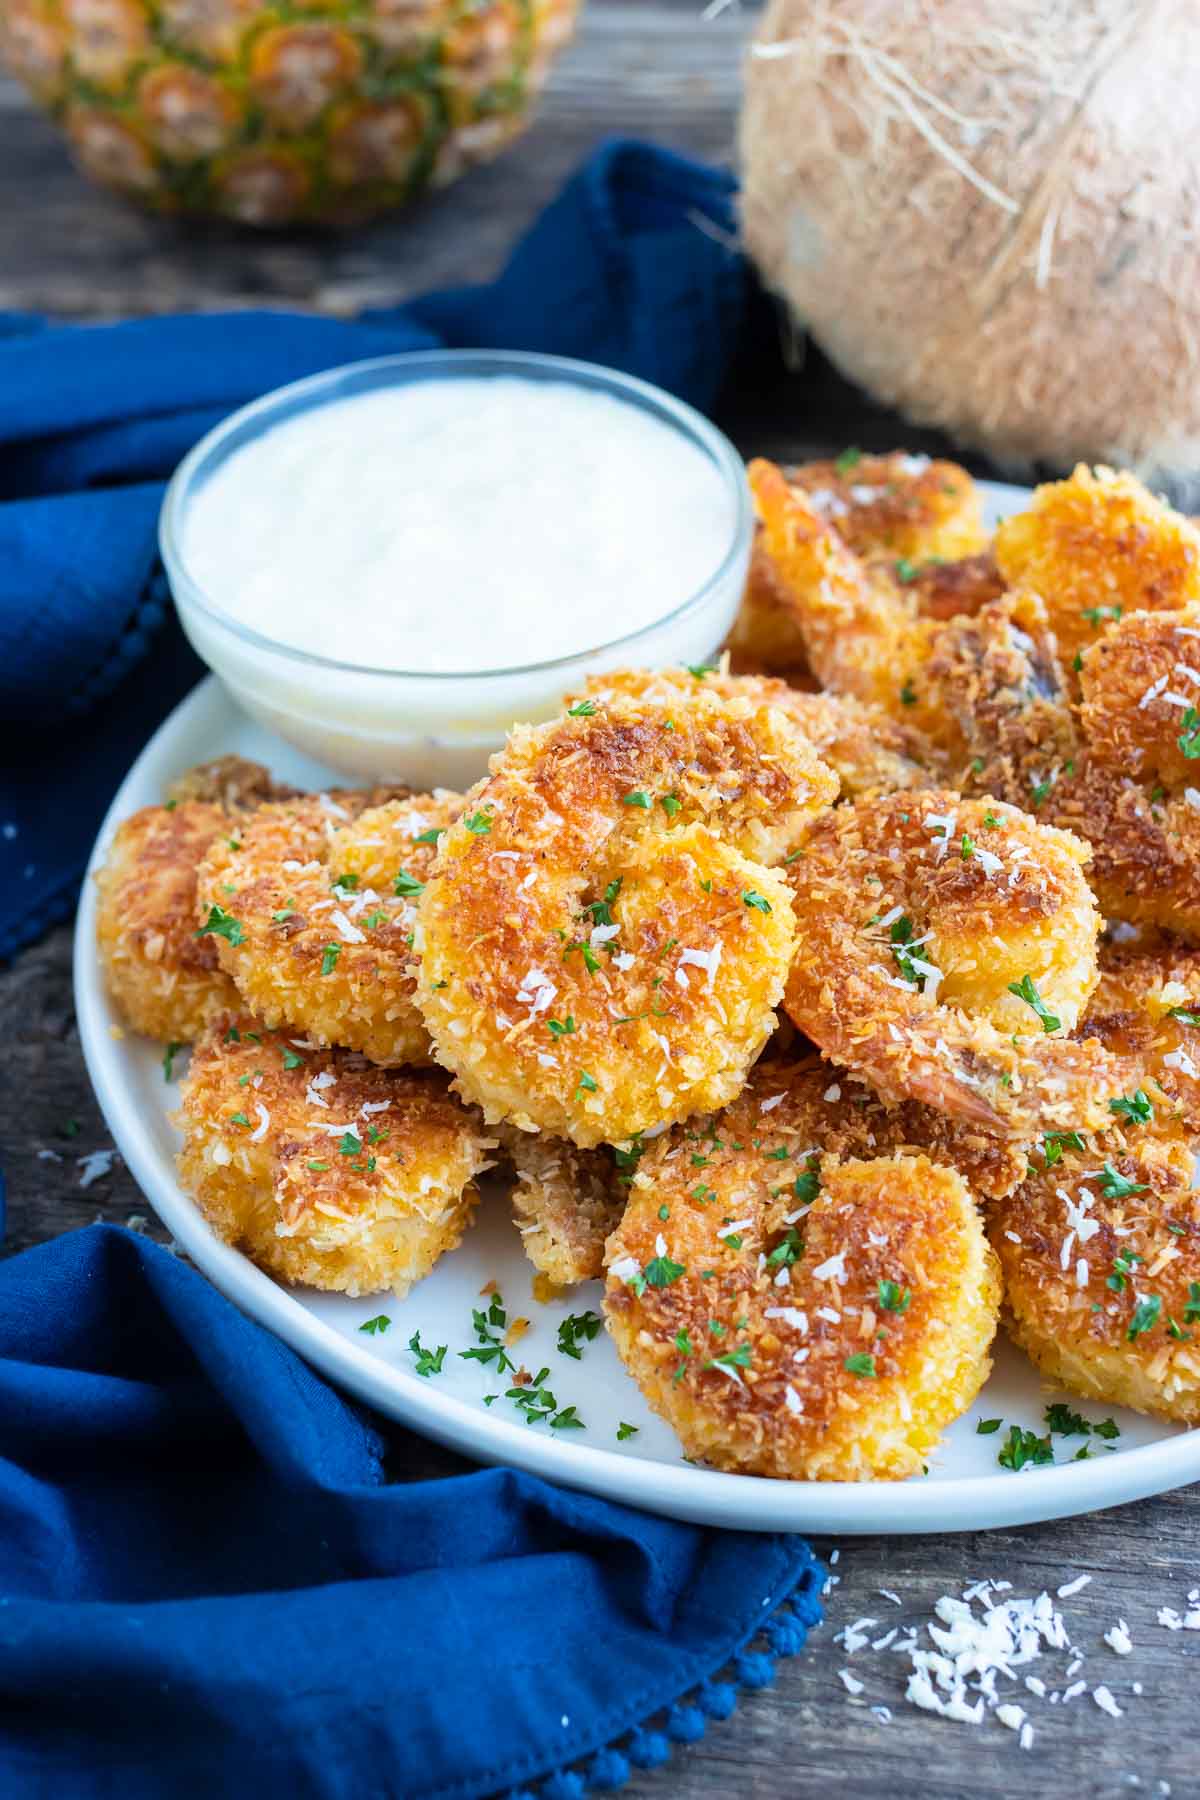 Golden shrimp that are covered in a shredded coconut and bread crumb coating.